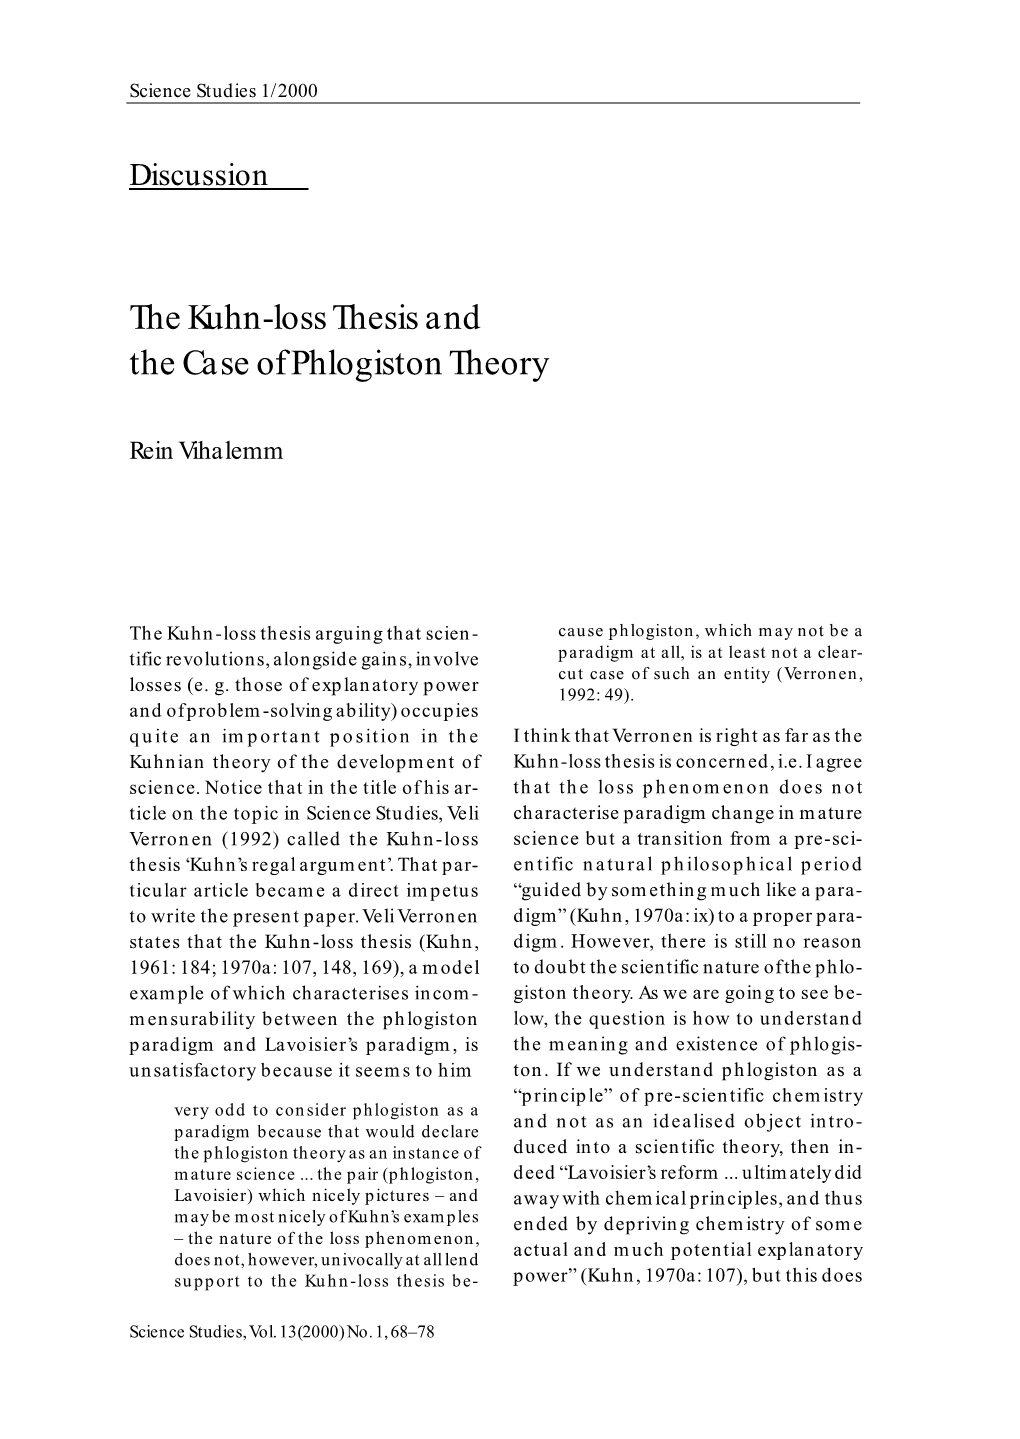 The Kuhn-Loss Thesis and the Case of Phlogiston Theory